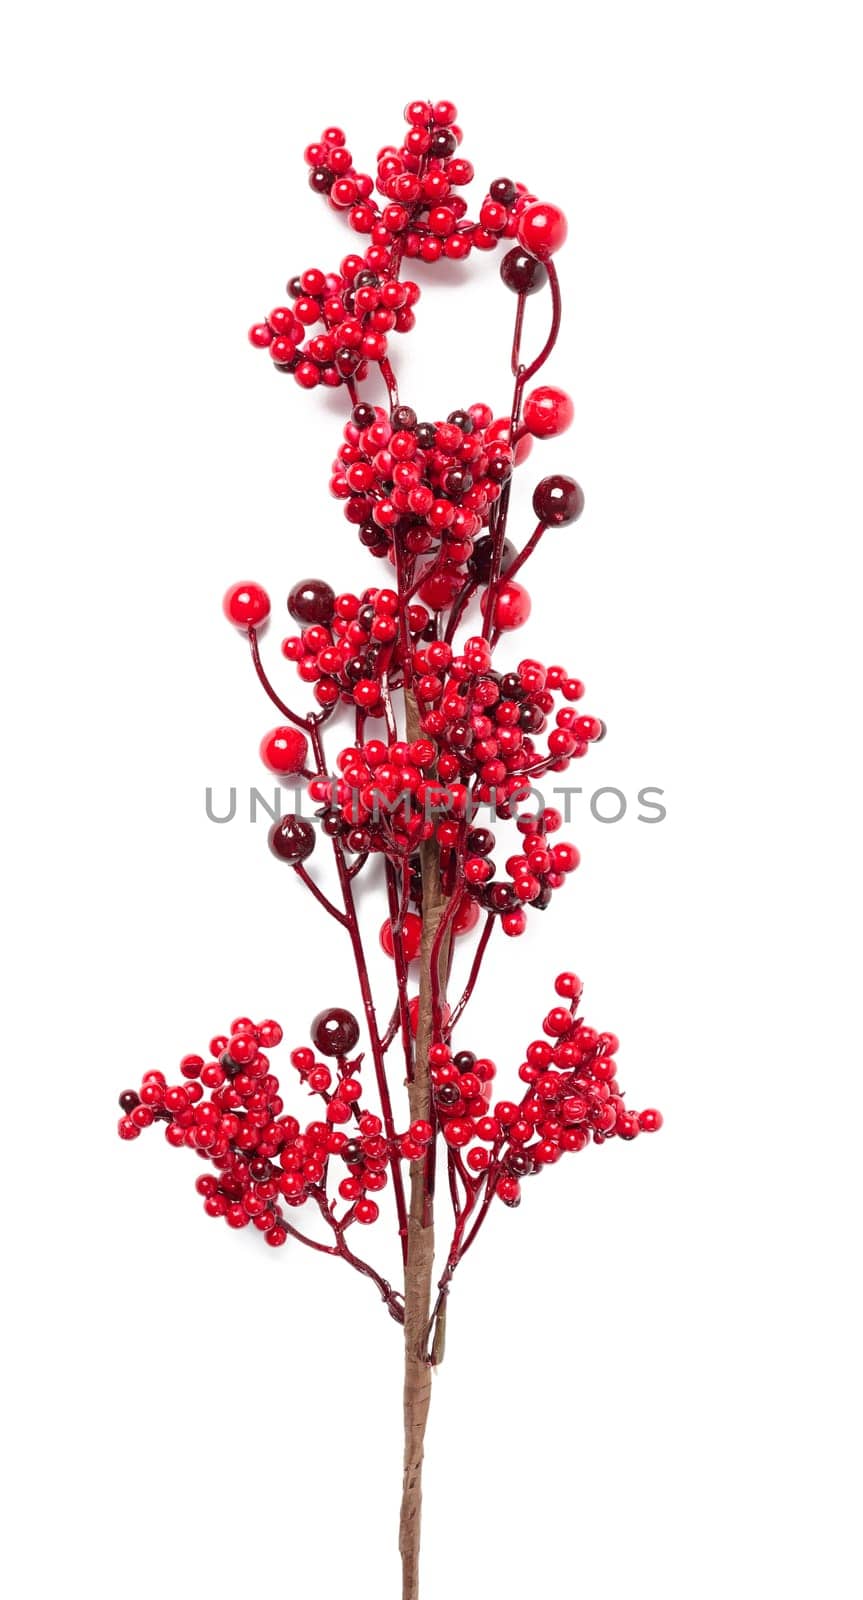 Decorative branch with red berries on a white background, Christmas decor by ndanko